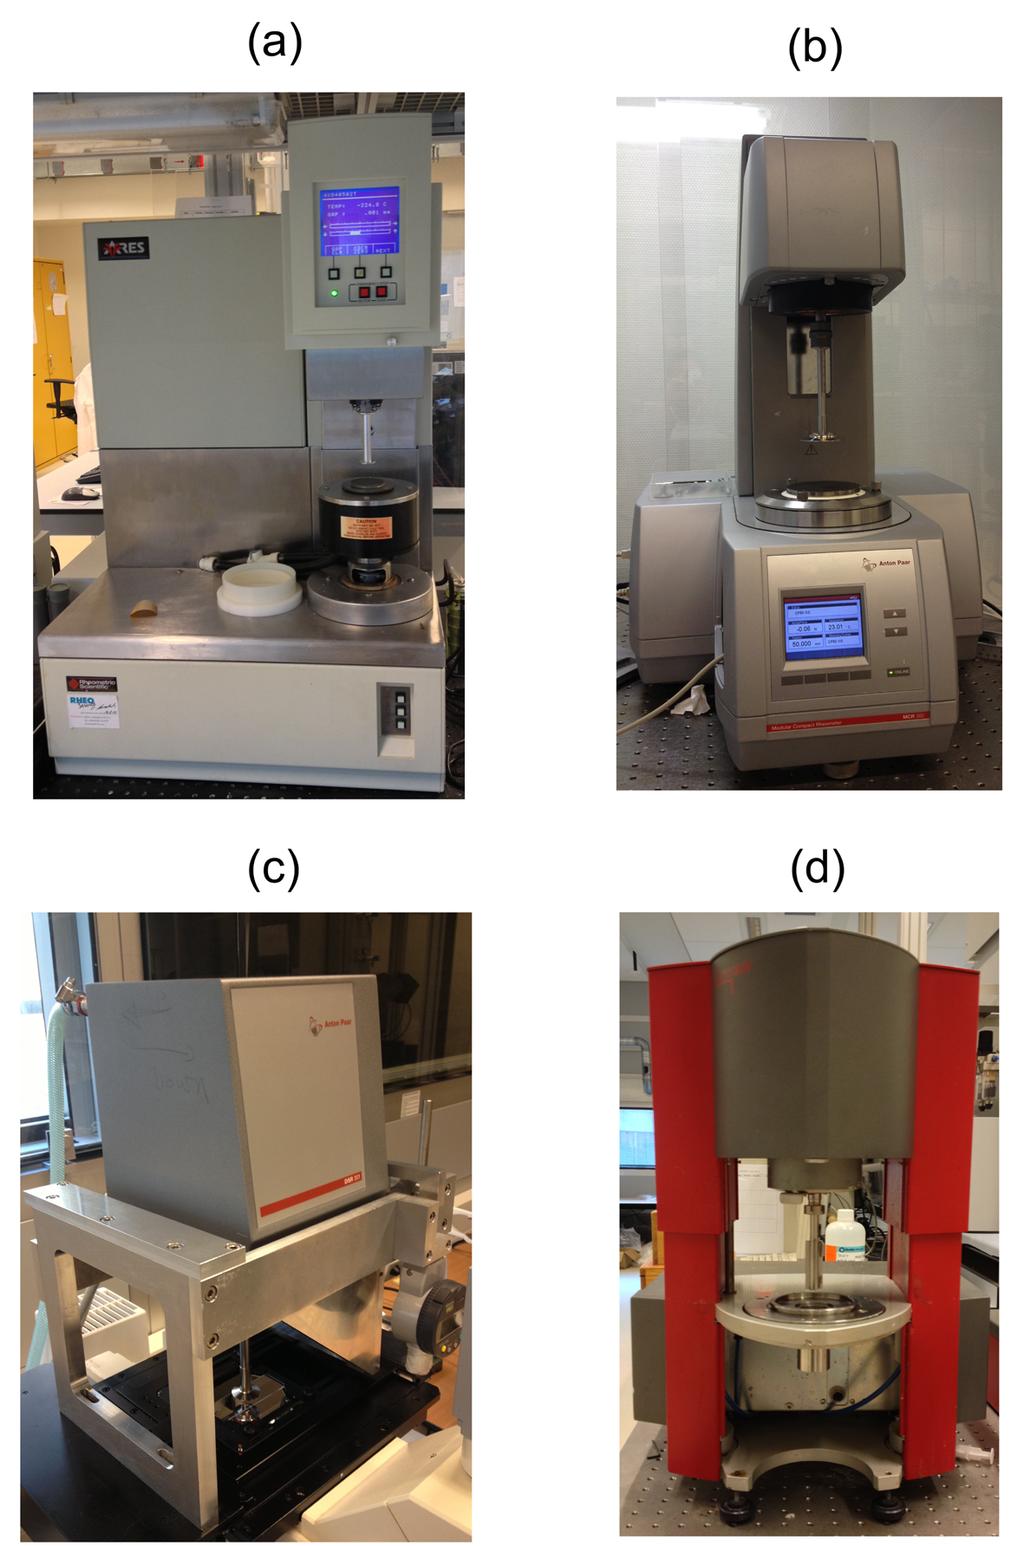 Chapter 2 Figure 2.5: Rheometers used in this thesis: Rheometrics ARES (a), Anton Paar MCR 300/301 (b), Anton Paar DSR 301 coupled to a confocal microscope (c), and Stresstech (d).